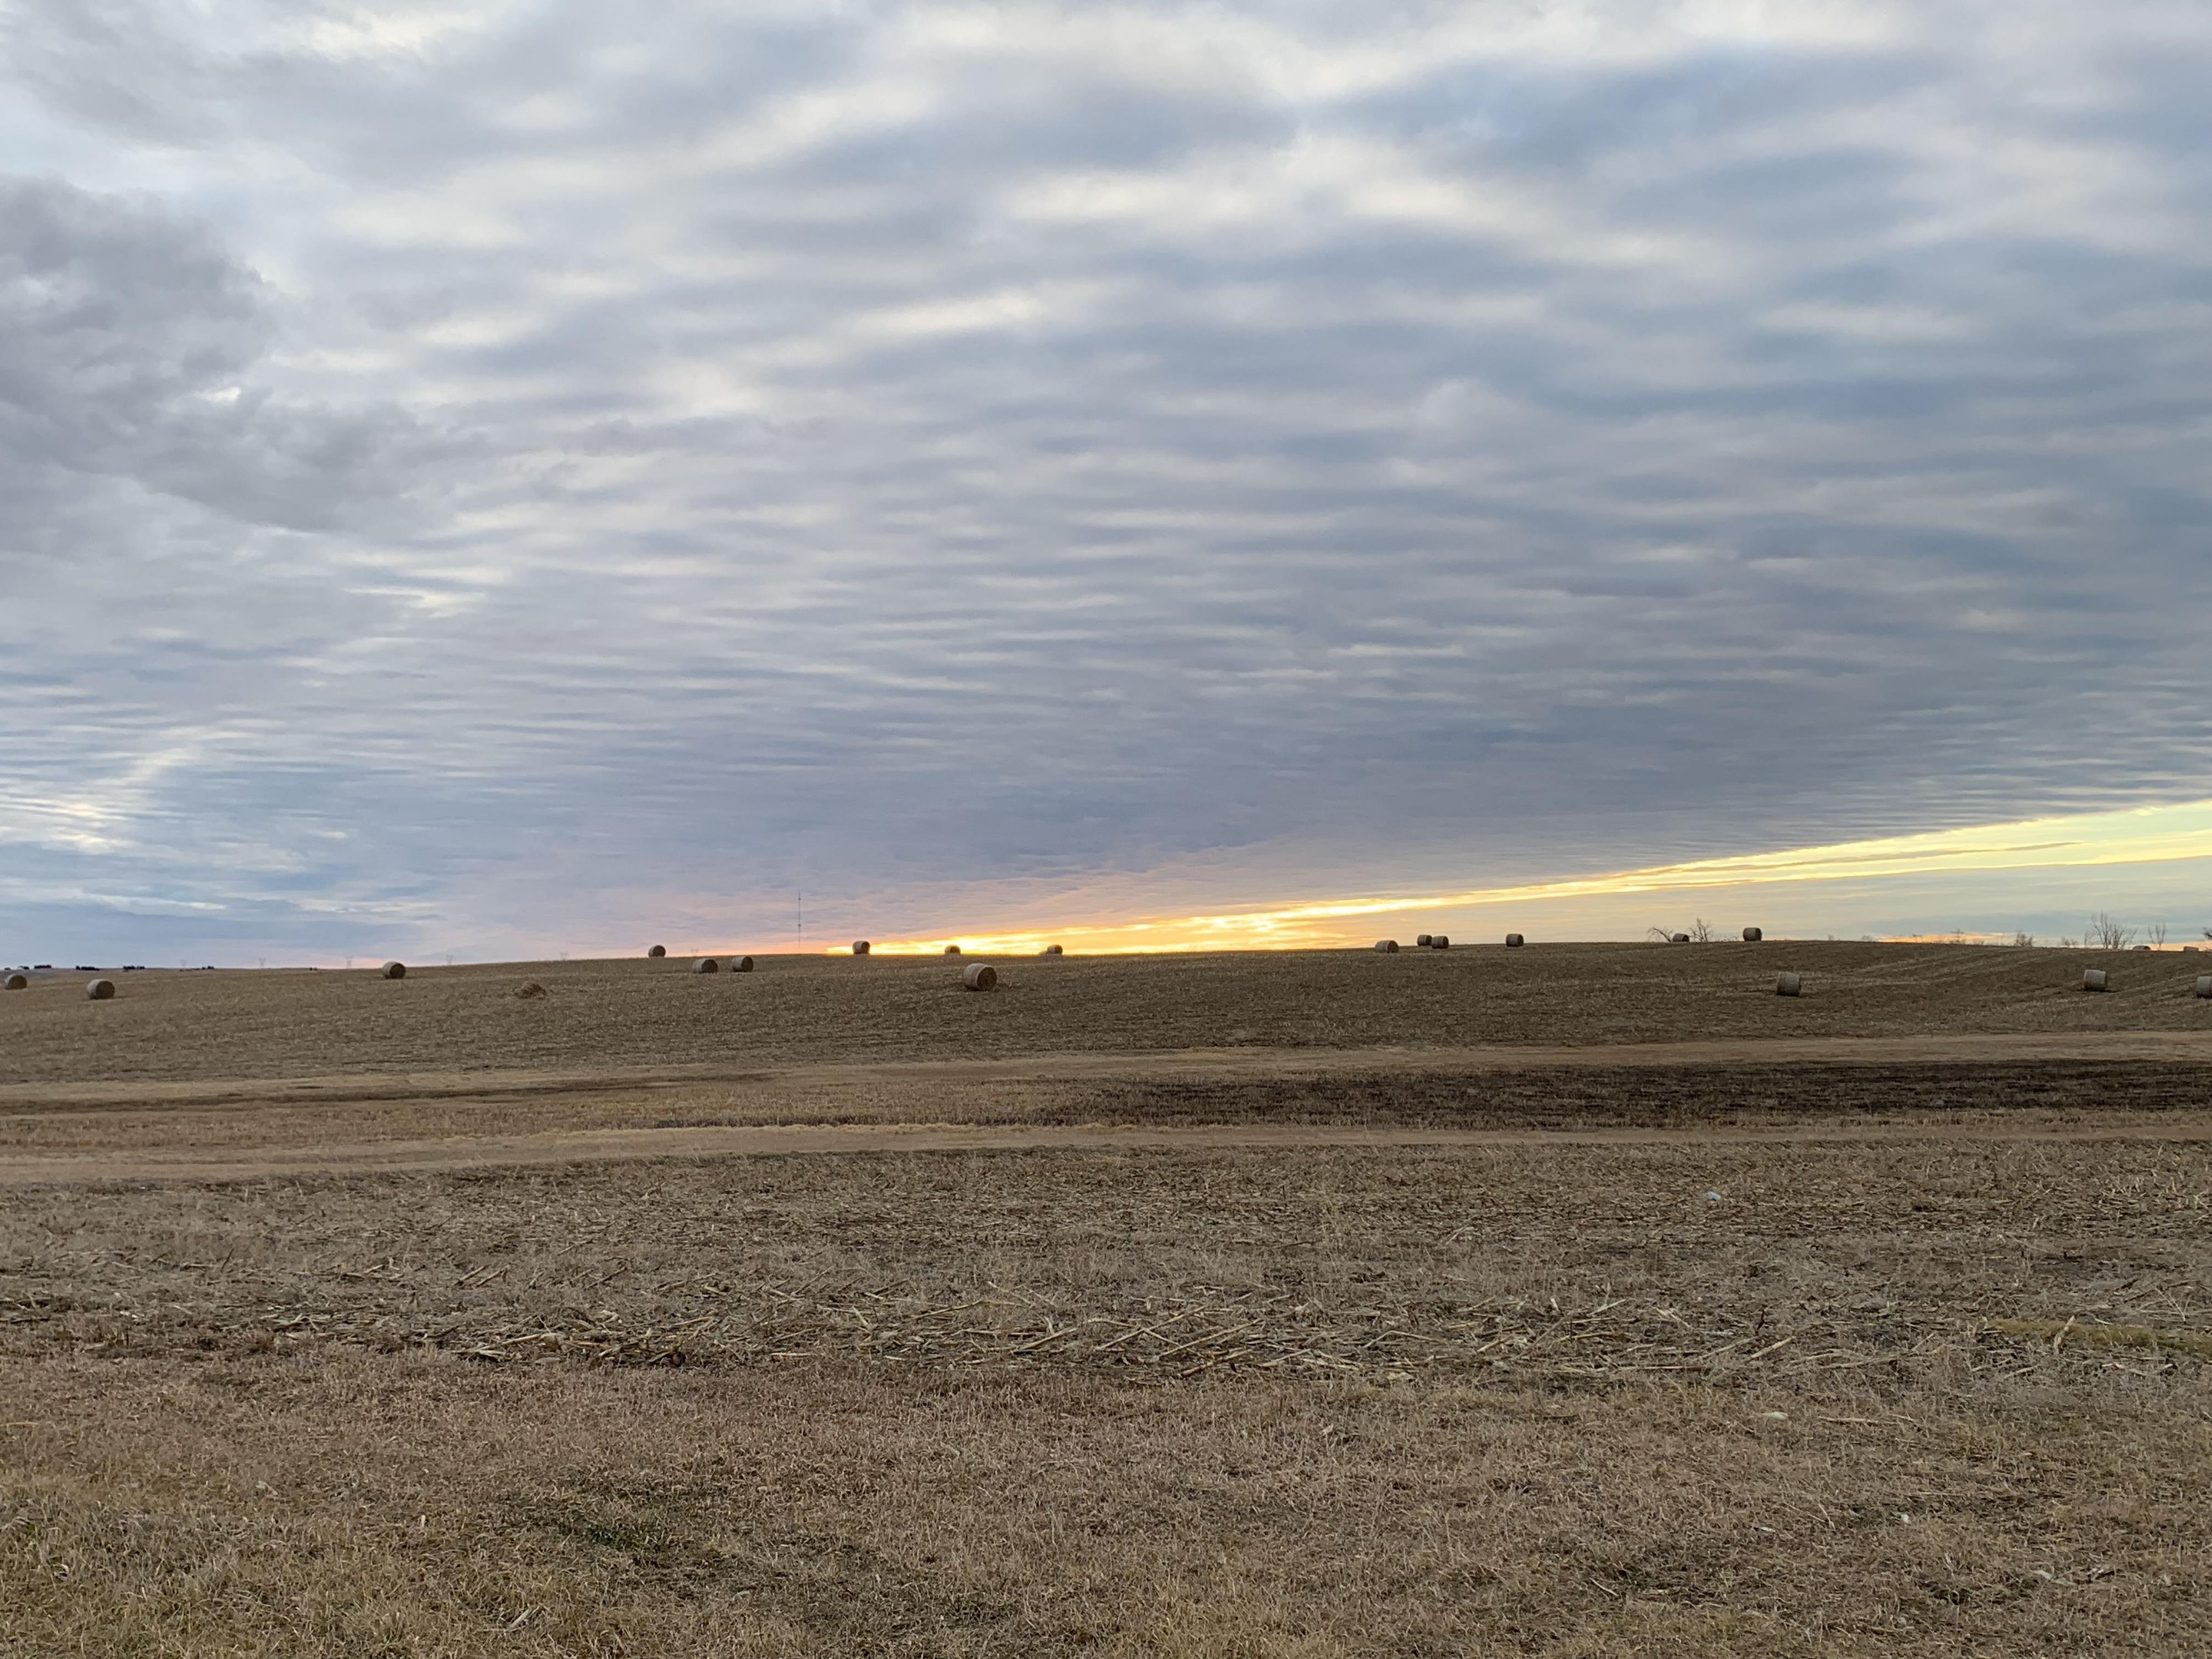 Morning Ag News, December 3, 2021: Expert describes what infrastructure investment means for rural America